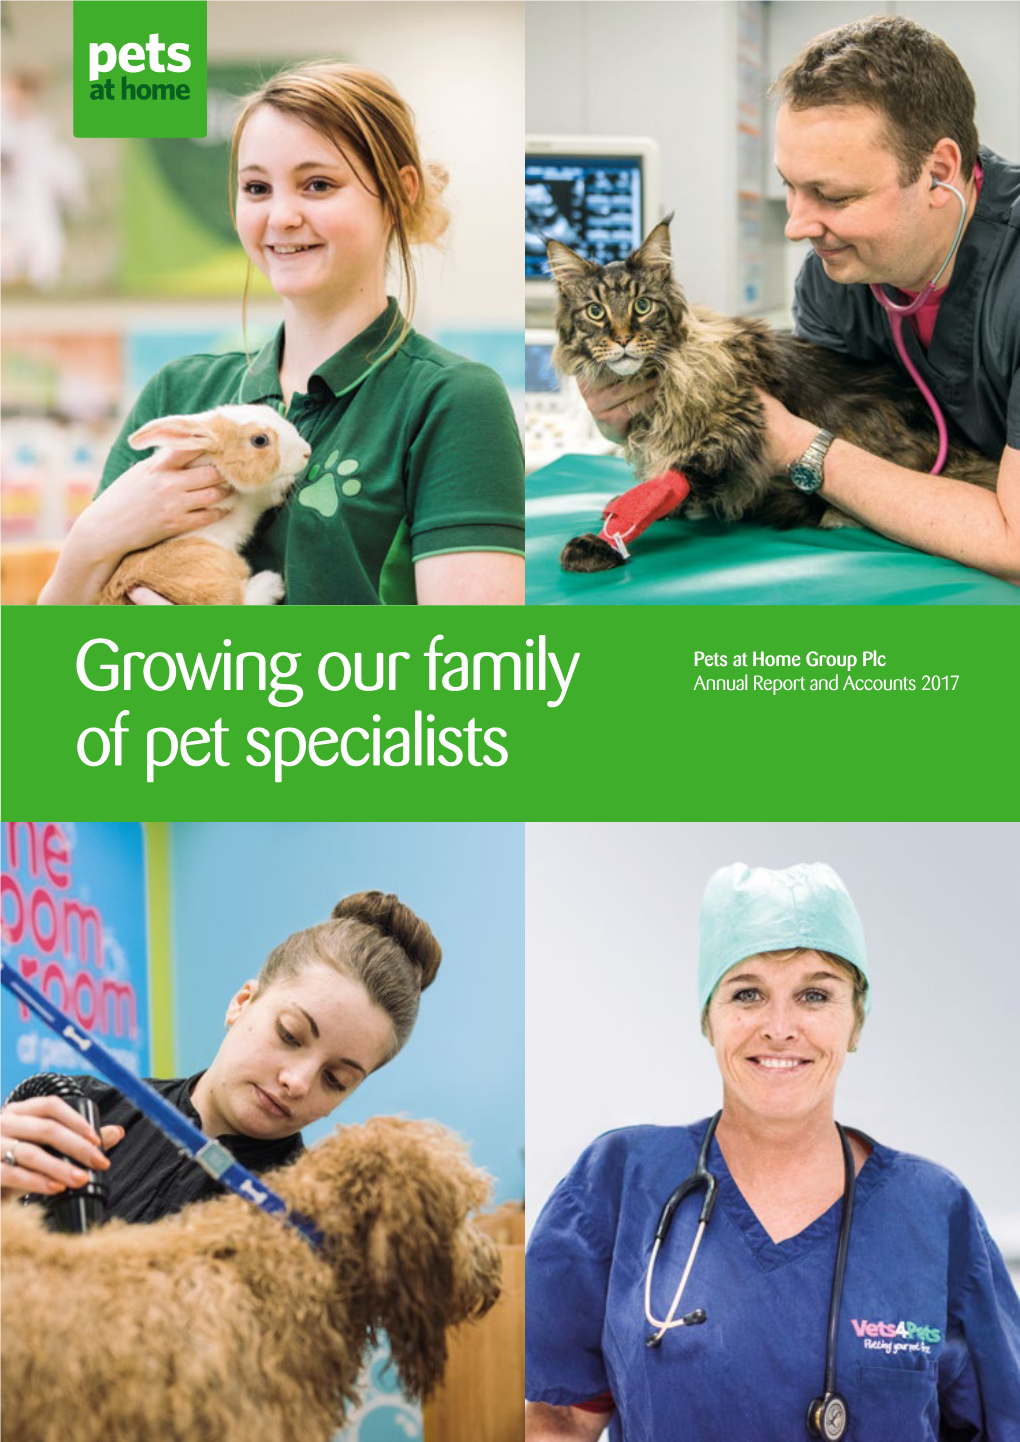 Pets at Home – Annual Report and Accounts 2017